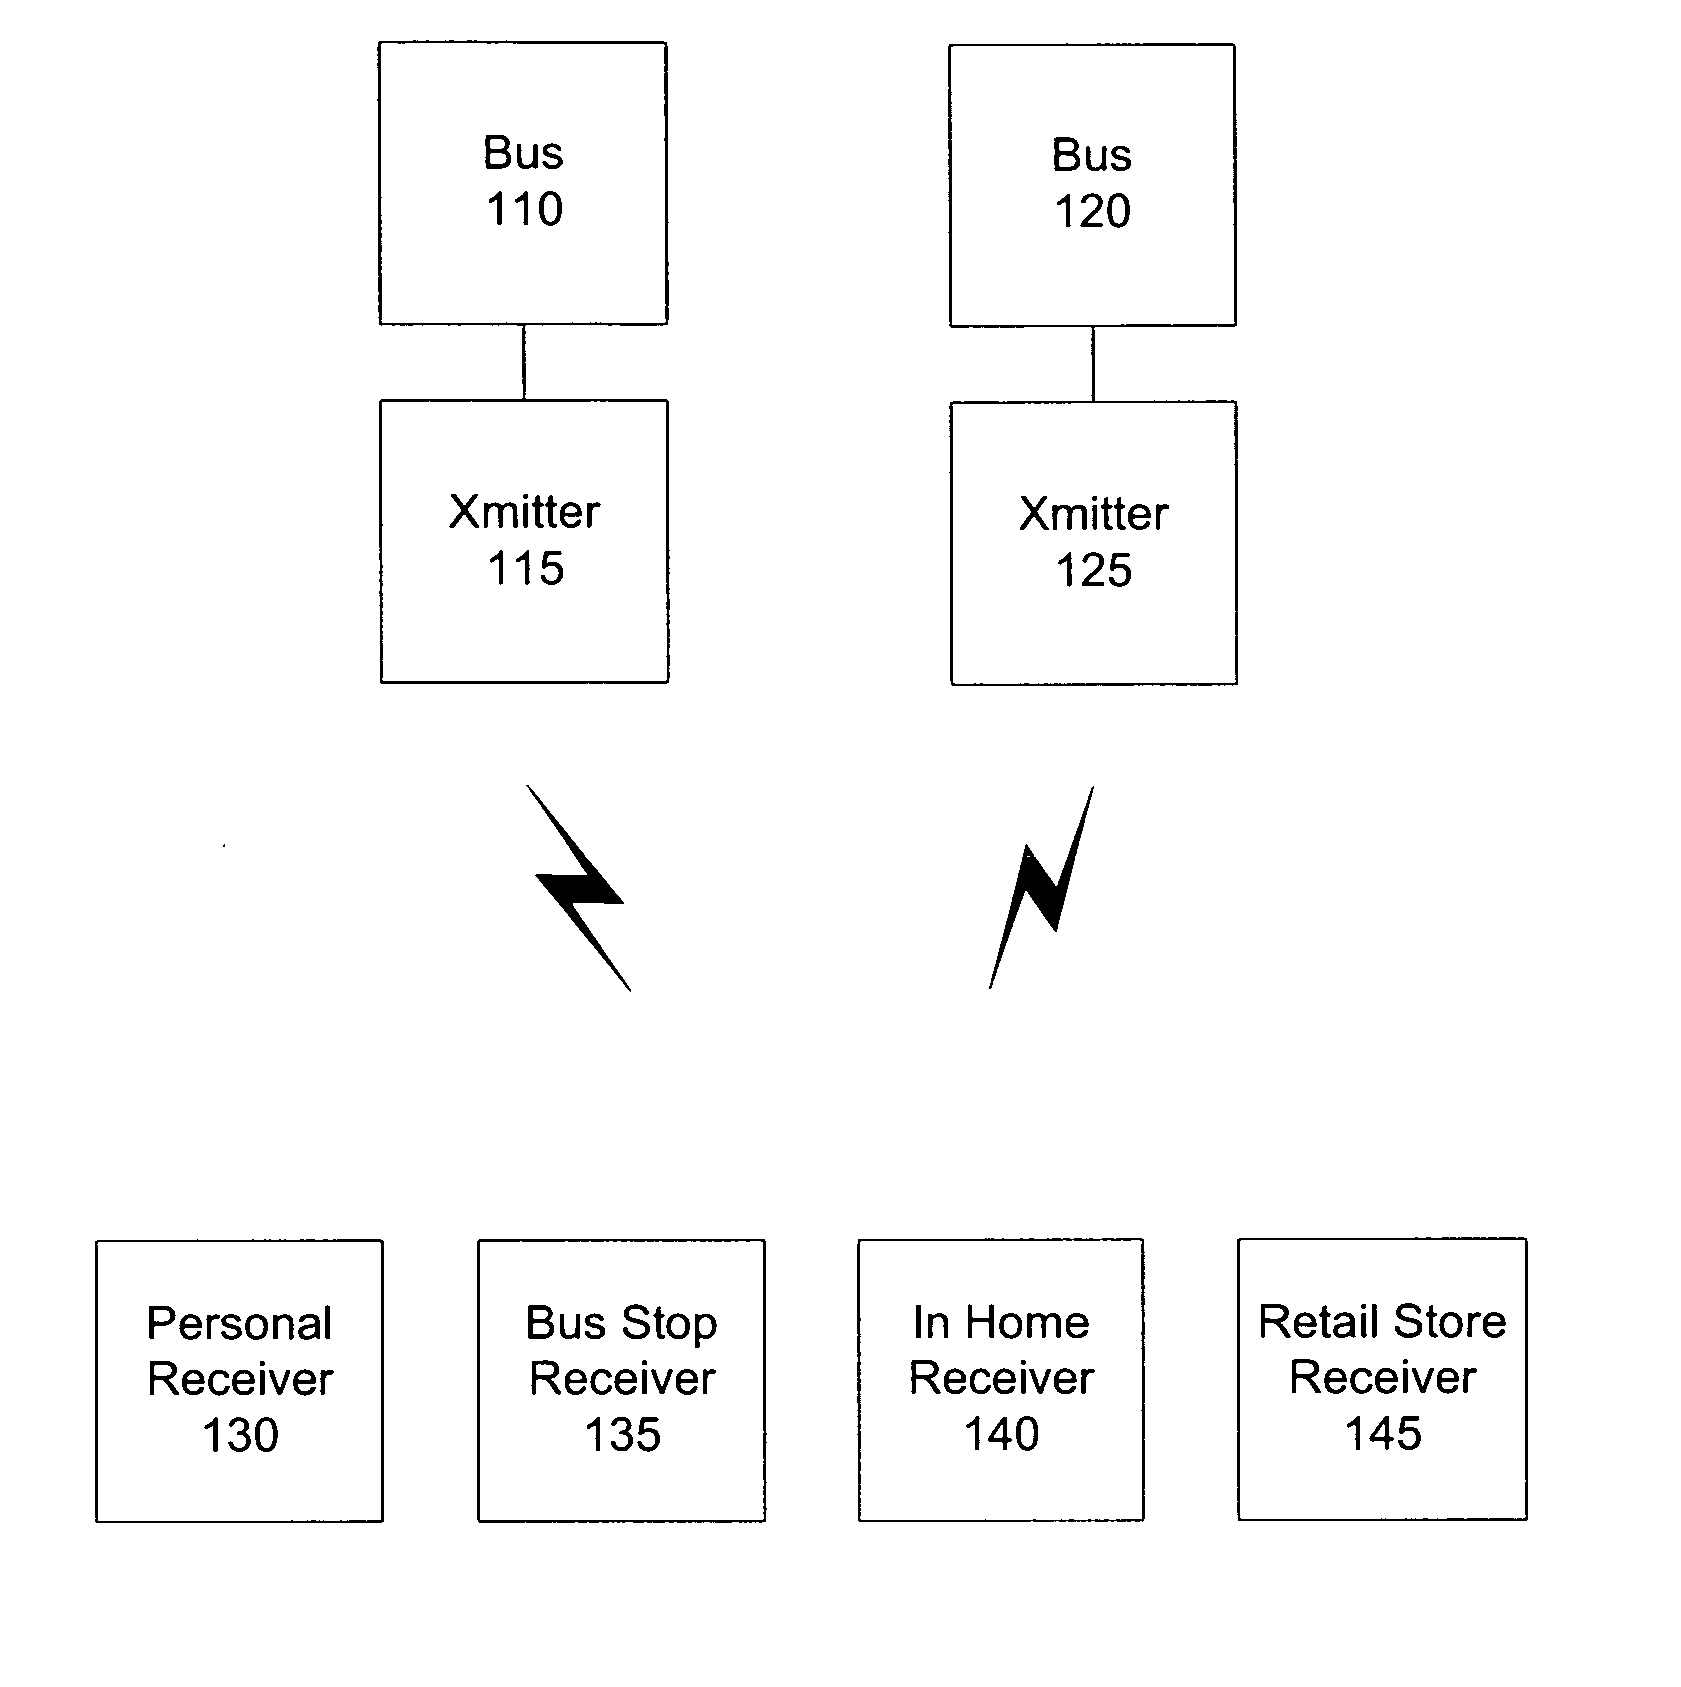 System and method for notification of arrival of bus or other vehicle